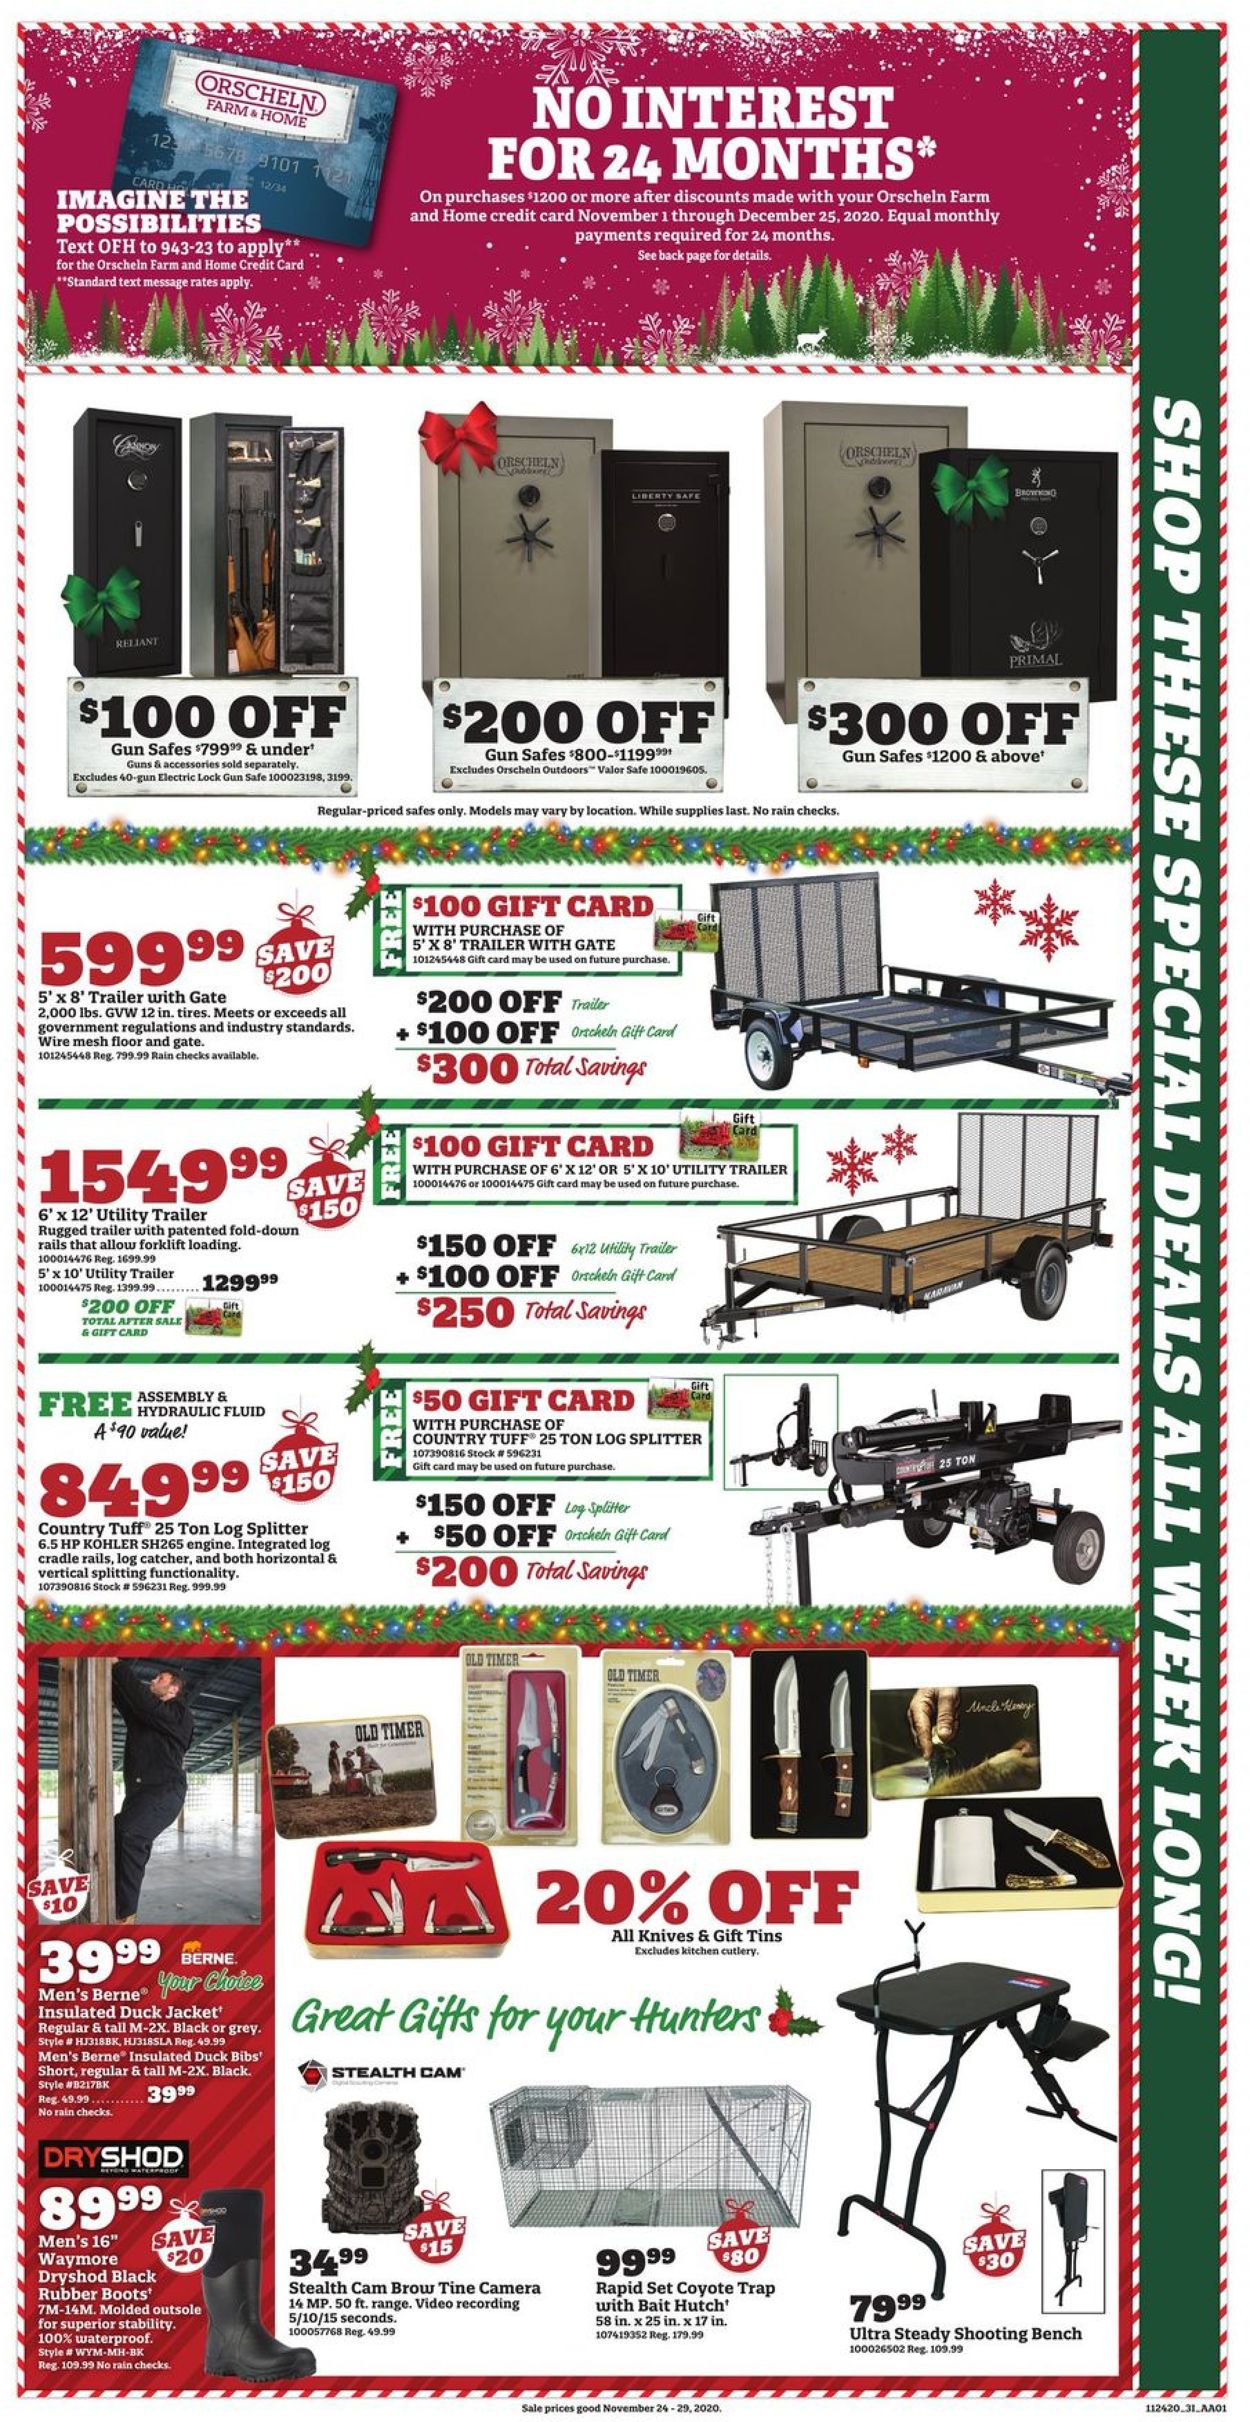 Orscheln Farm and Home - Black Friday Ad 2020 Weekly Ad Circular - valid 11/24-11/29/2020 (Page 5)